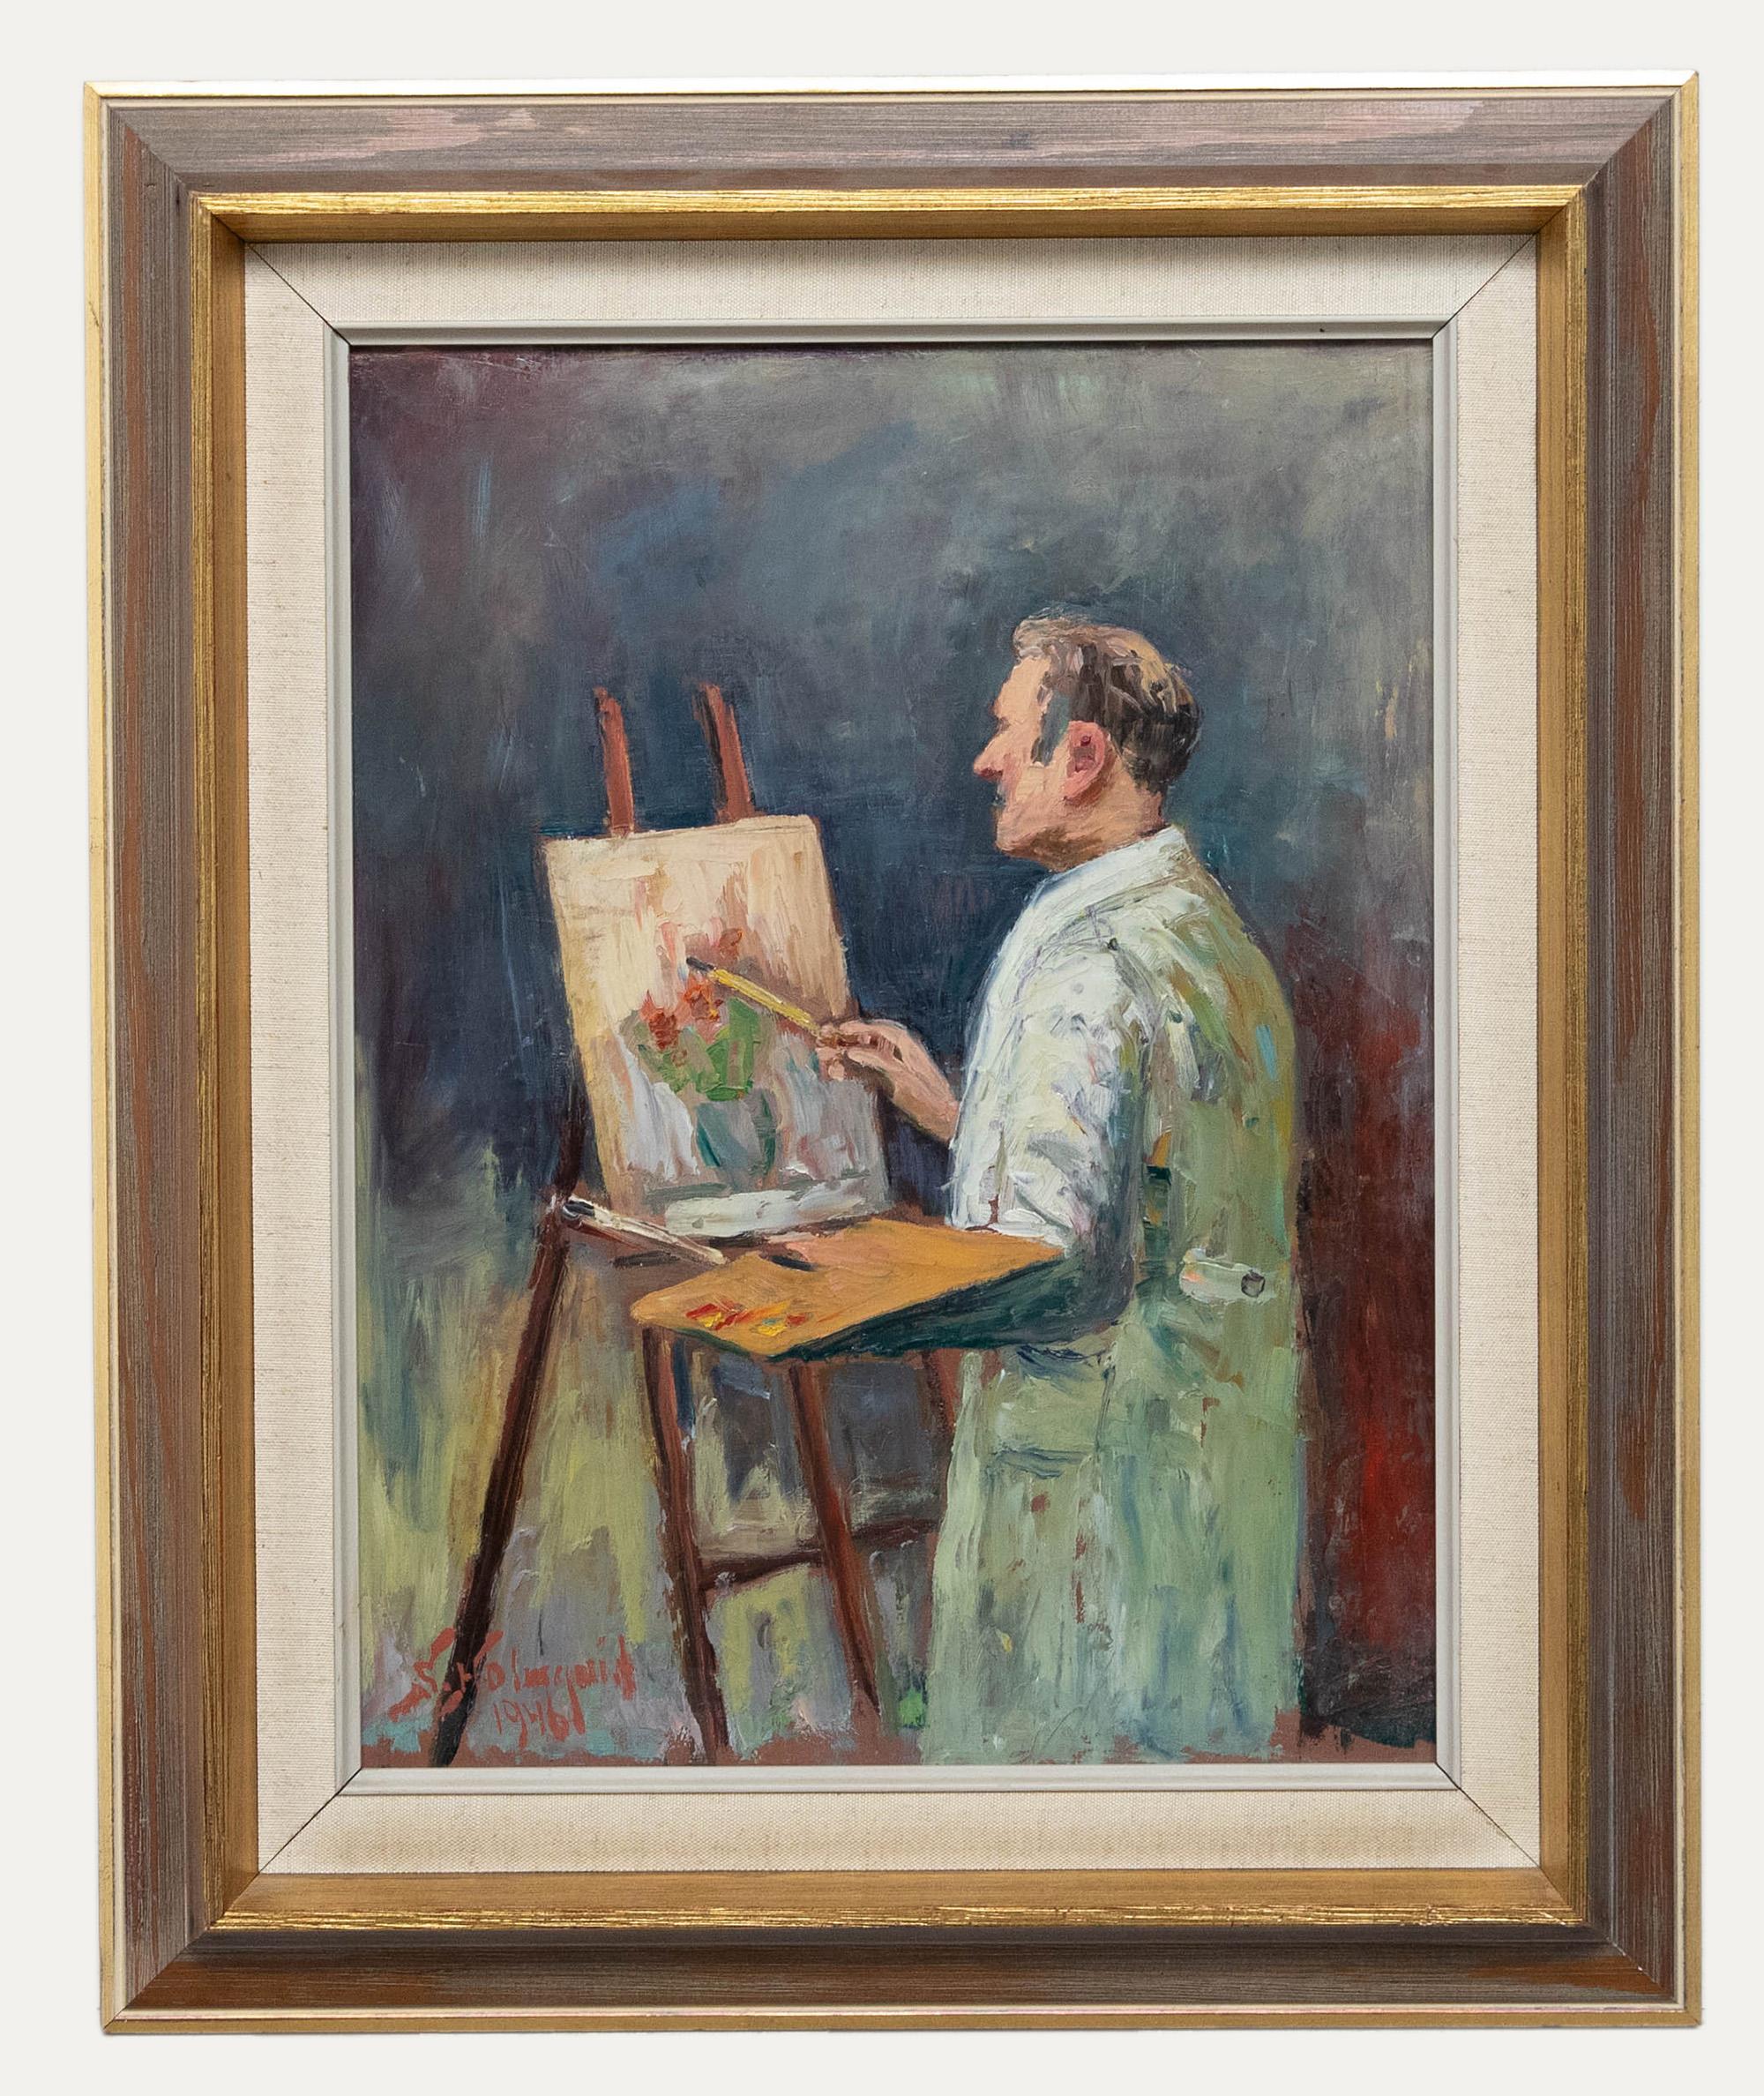 Unknown Portrait Painting - Sigvard Holmquist (b.1911) - 1946 Oil, Portrait of the Artist Painting